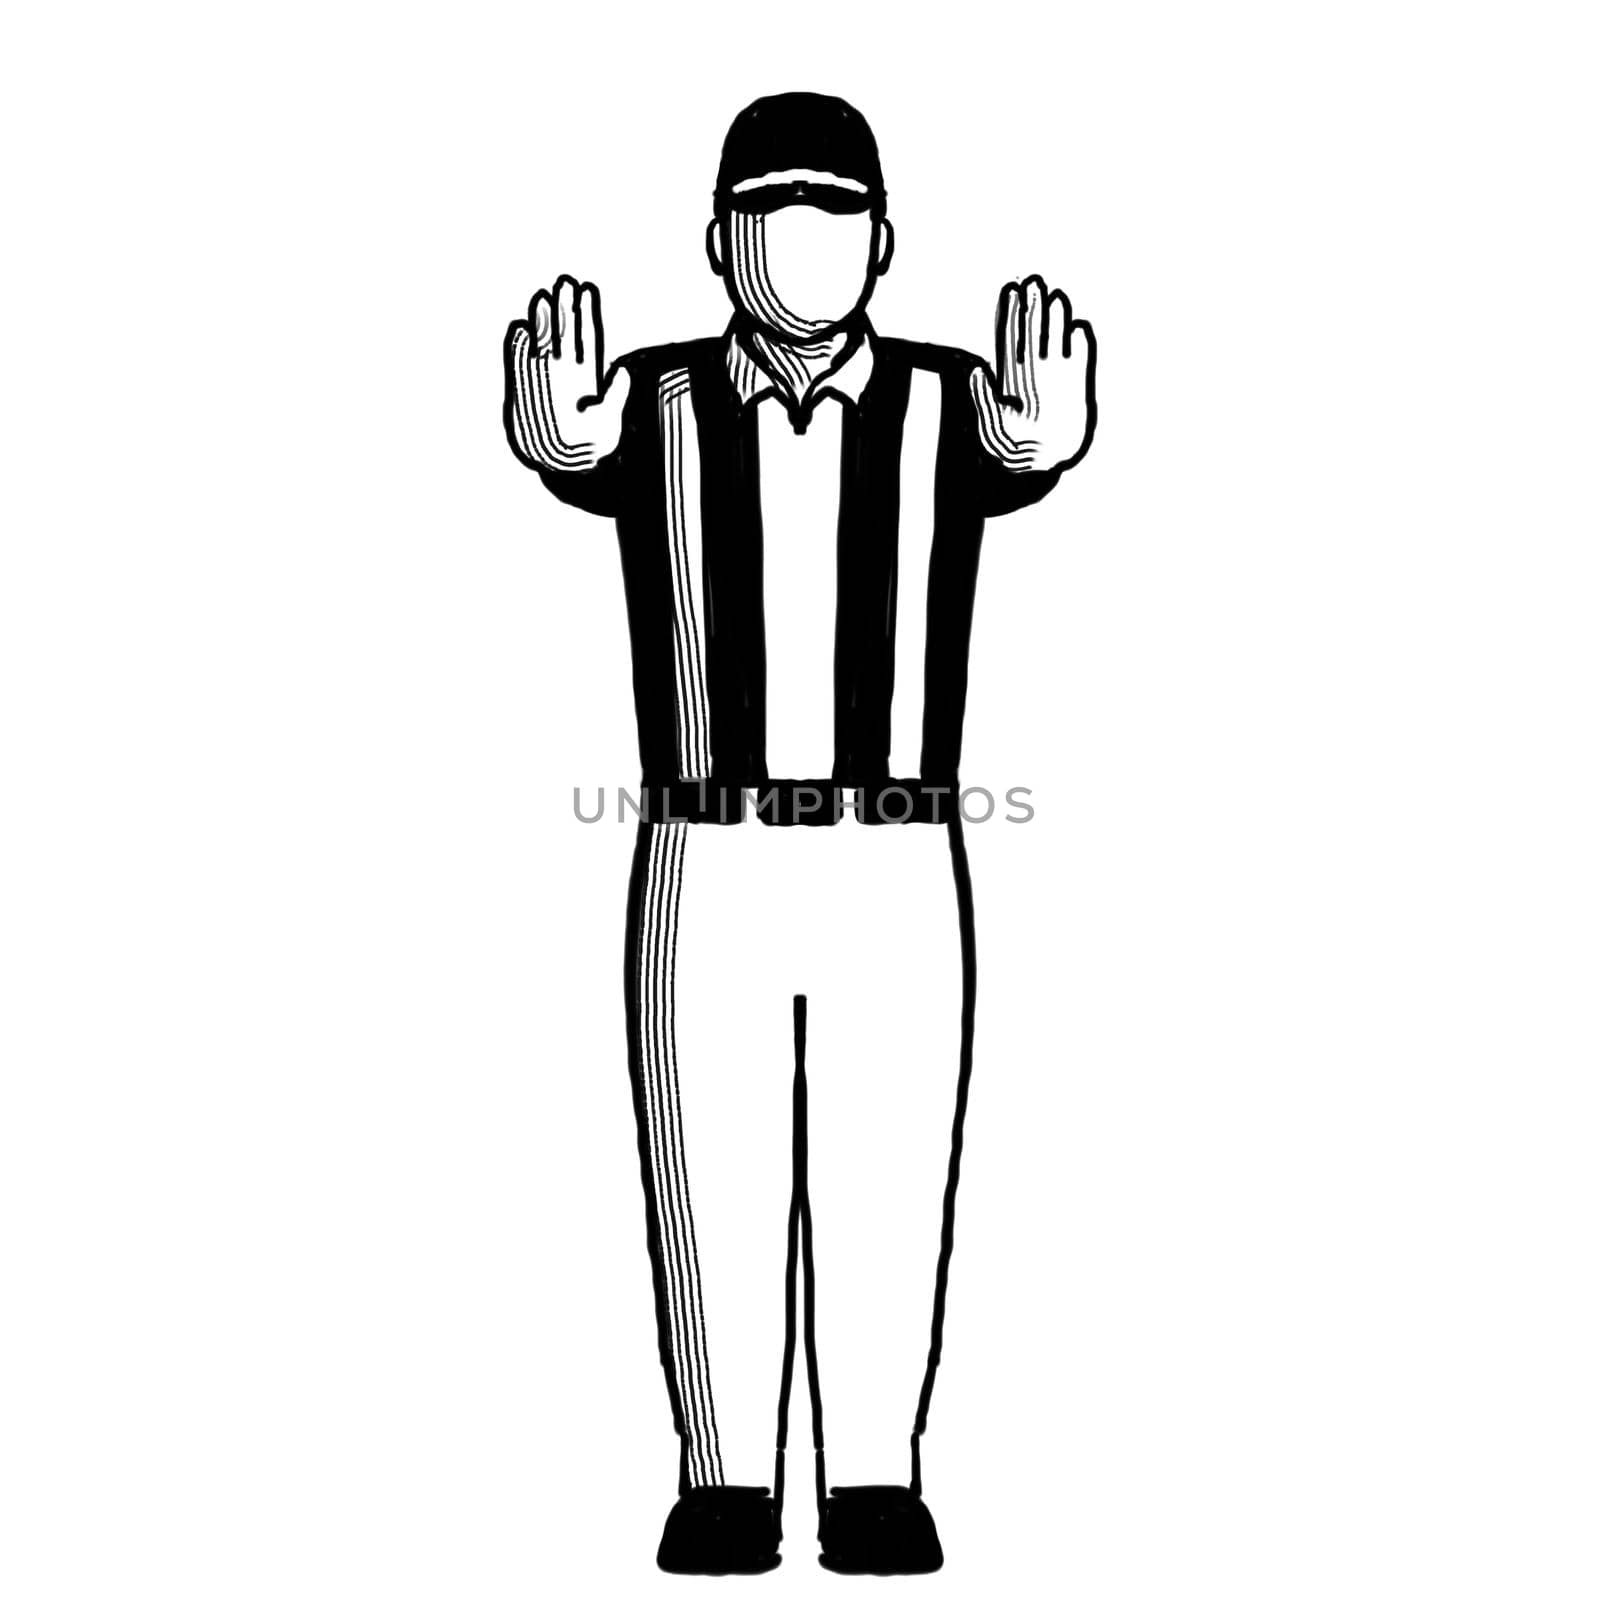 American Football Official pass interference sign Hand Signal Retro by patrimonio